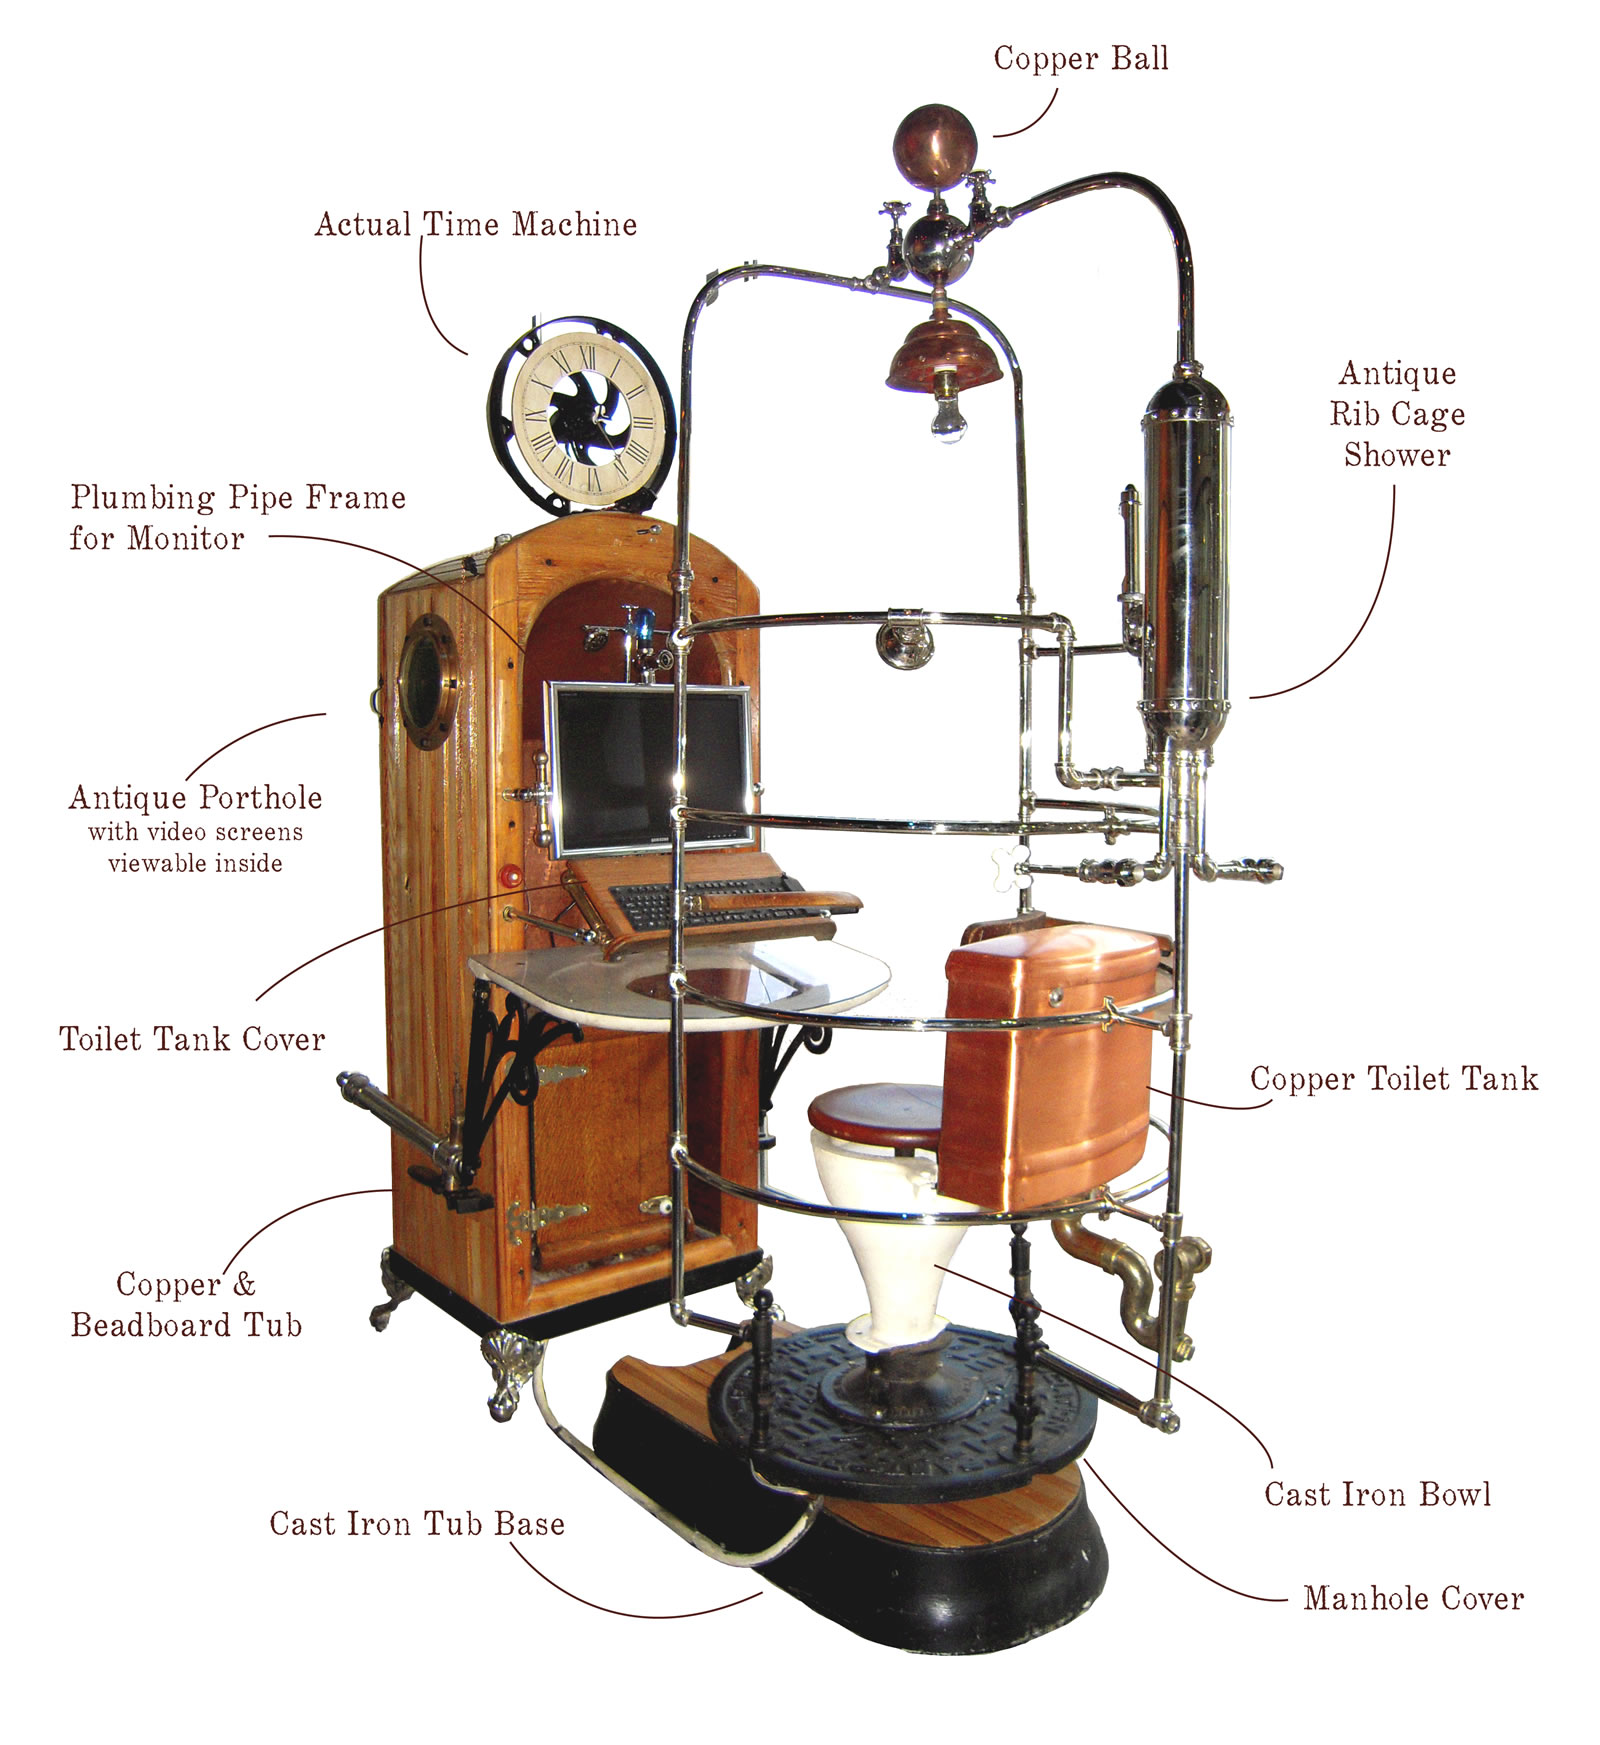 Featured image for “Rib Case Shower Time Machine Workstation”